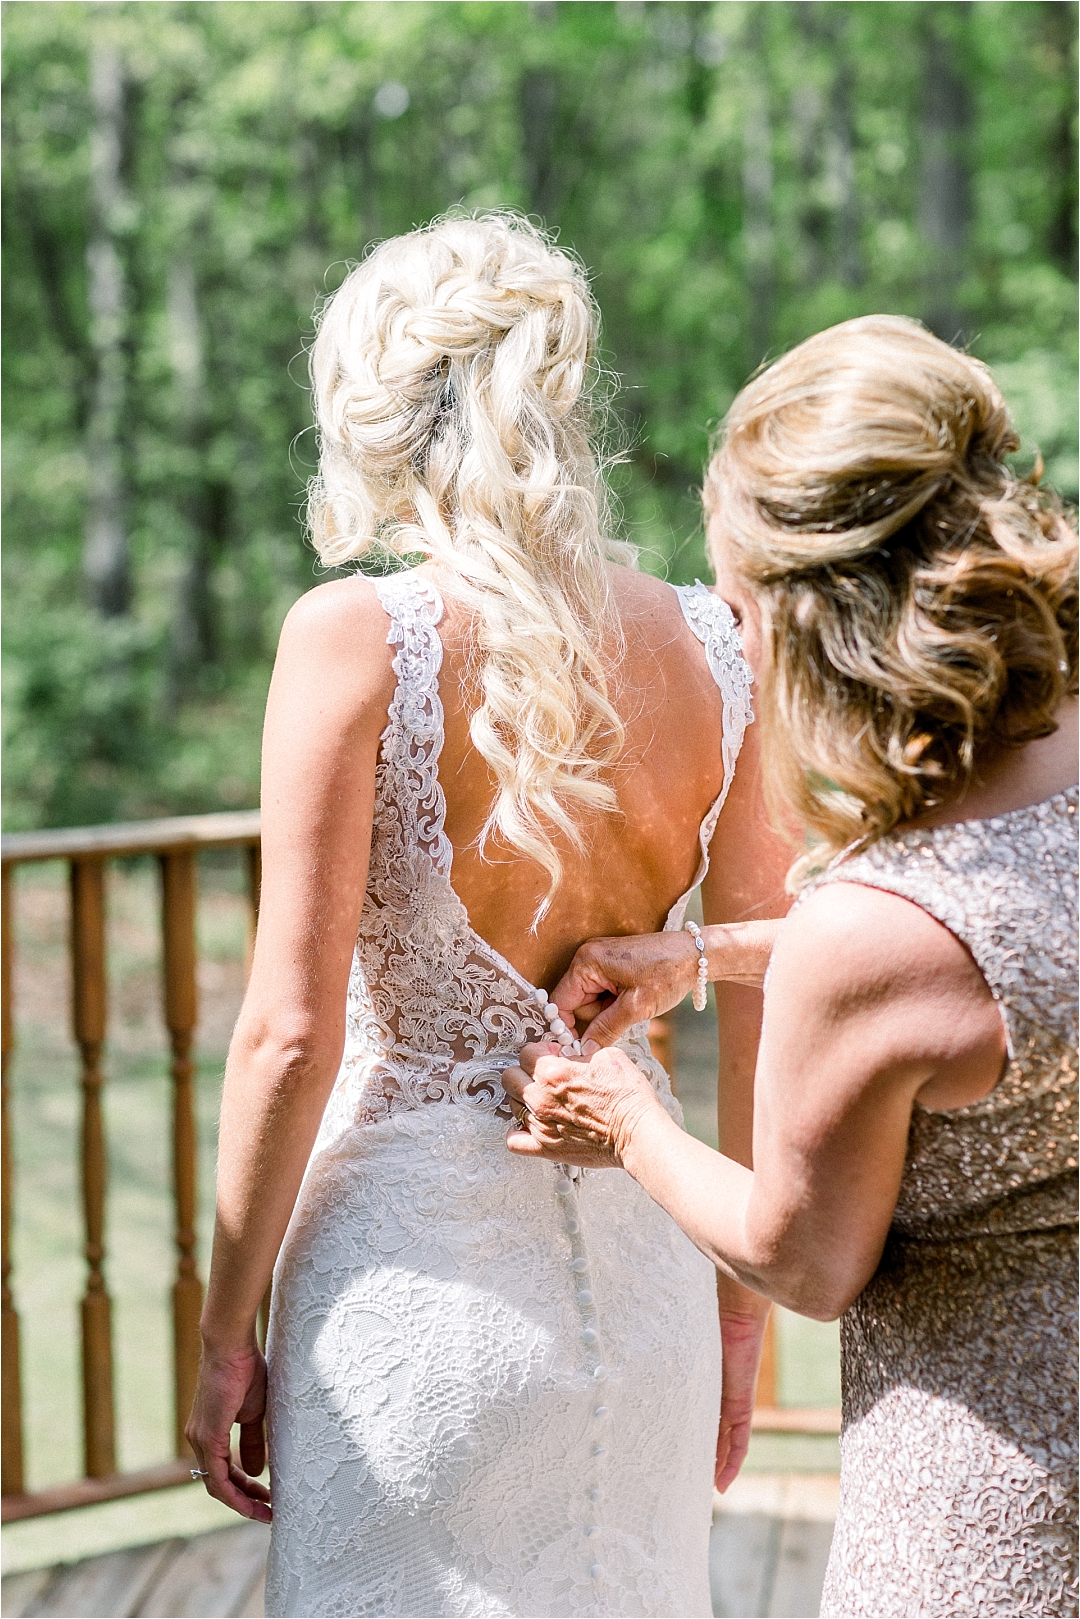 Mom helping daughter into lace wedding dress_Photos by Leigh Wolfe, Atlanta's Top Wedding Photographer